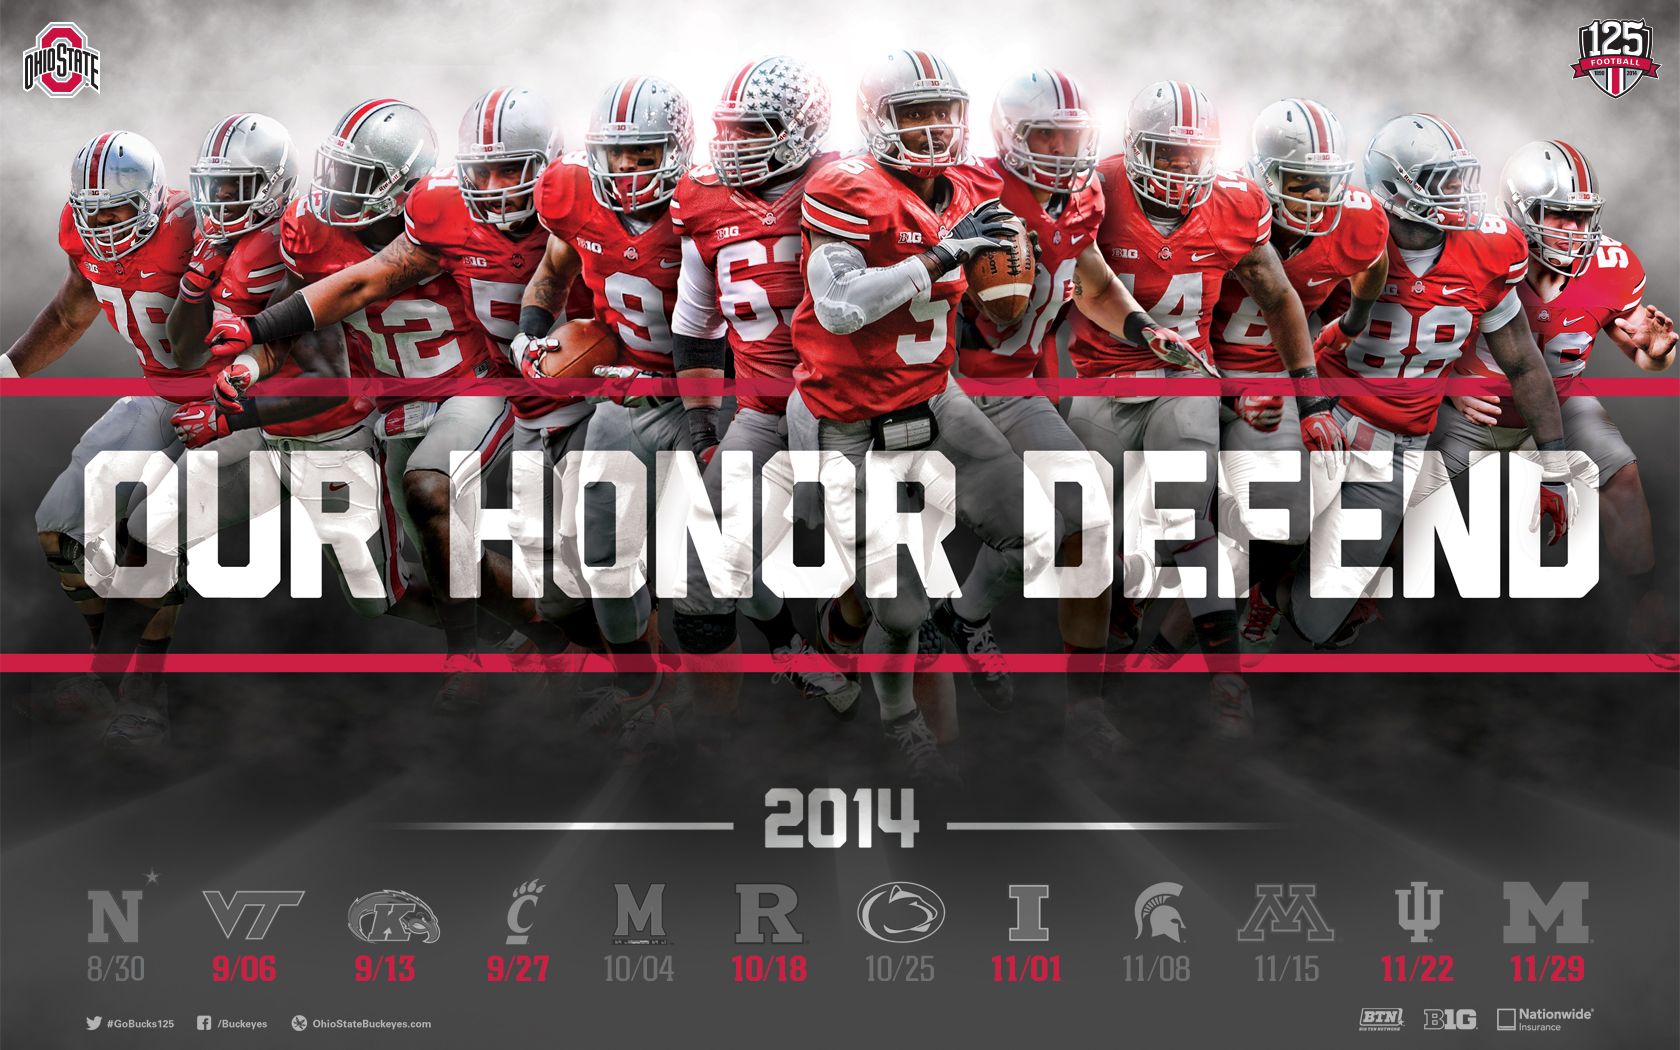 Download The Ohio State Football 2014 Schedule Poster for Printing ...